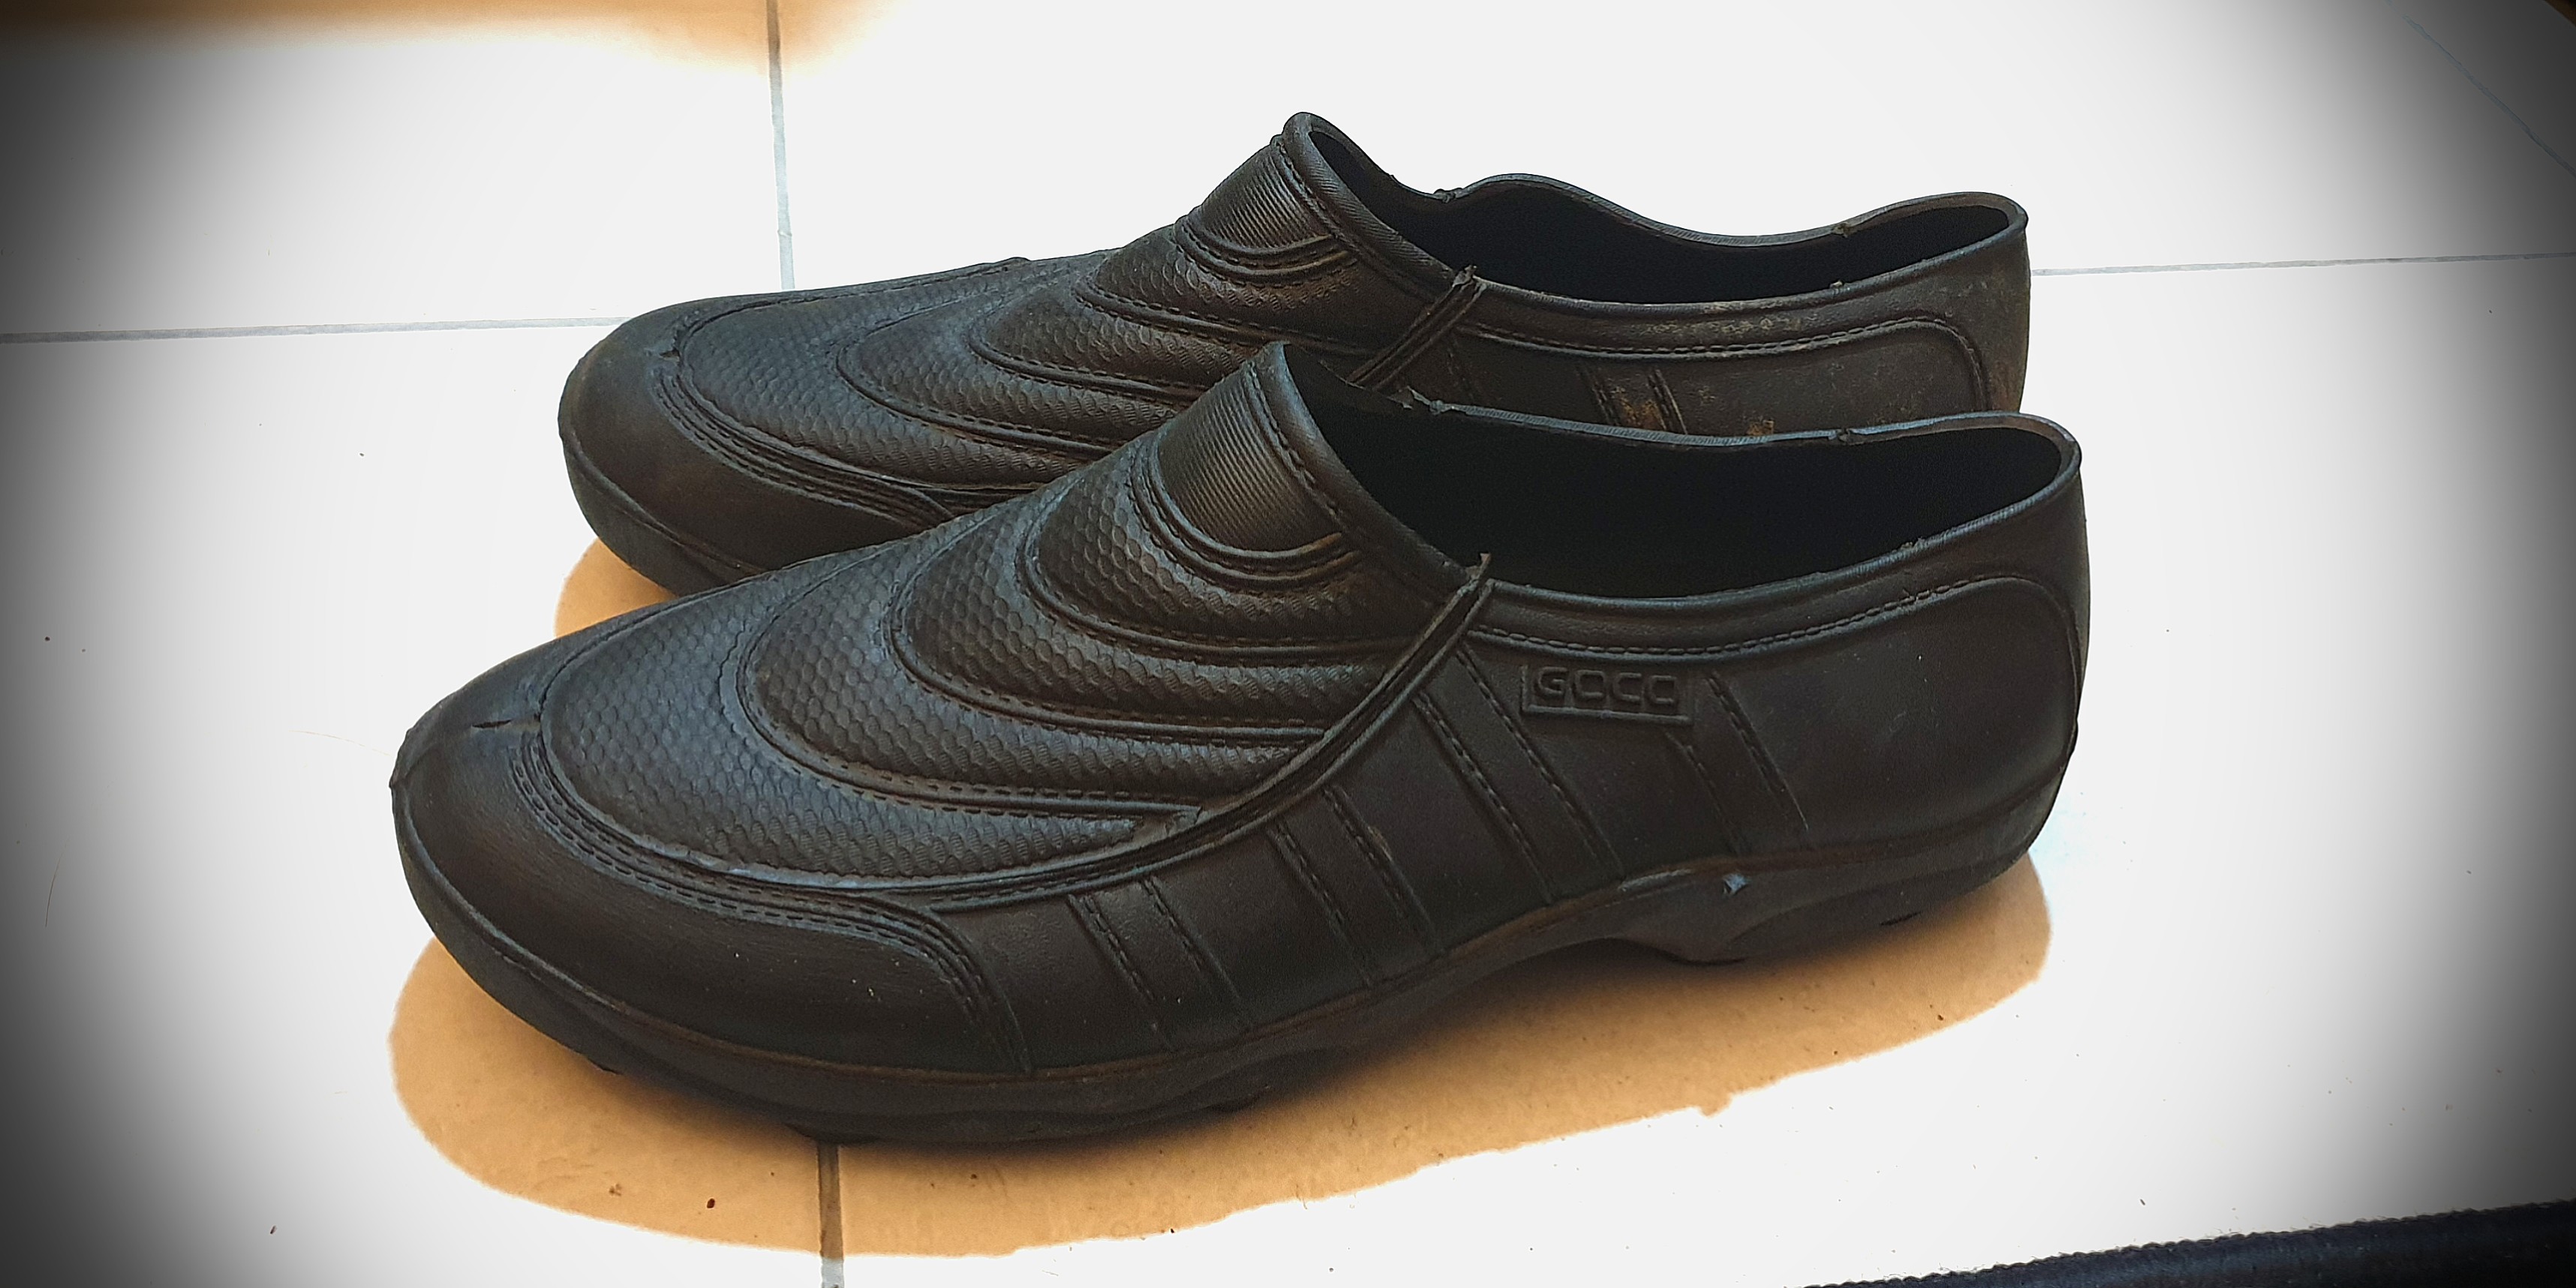 ADIDAS KAMPUNG Rubber Shoes, Fashion, Footwear, Dress shoes on Carousell